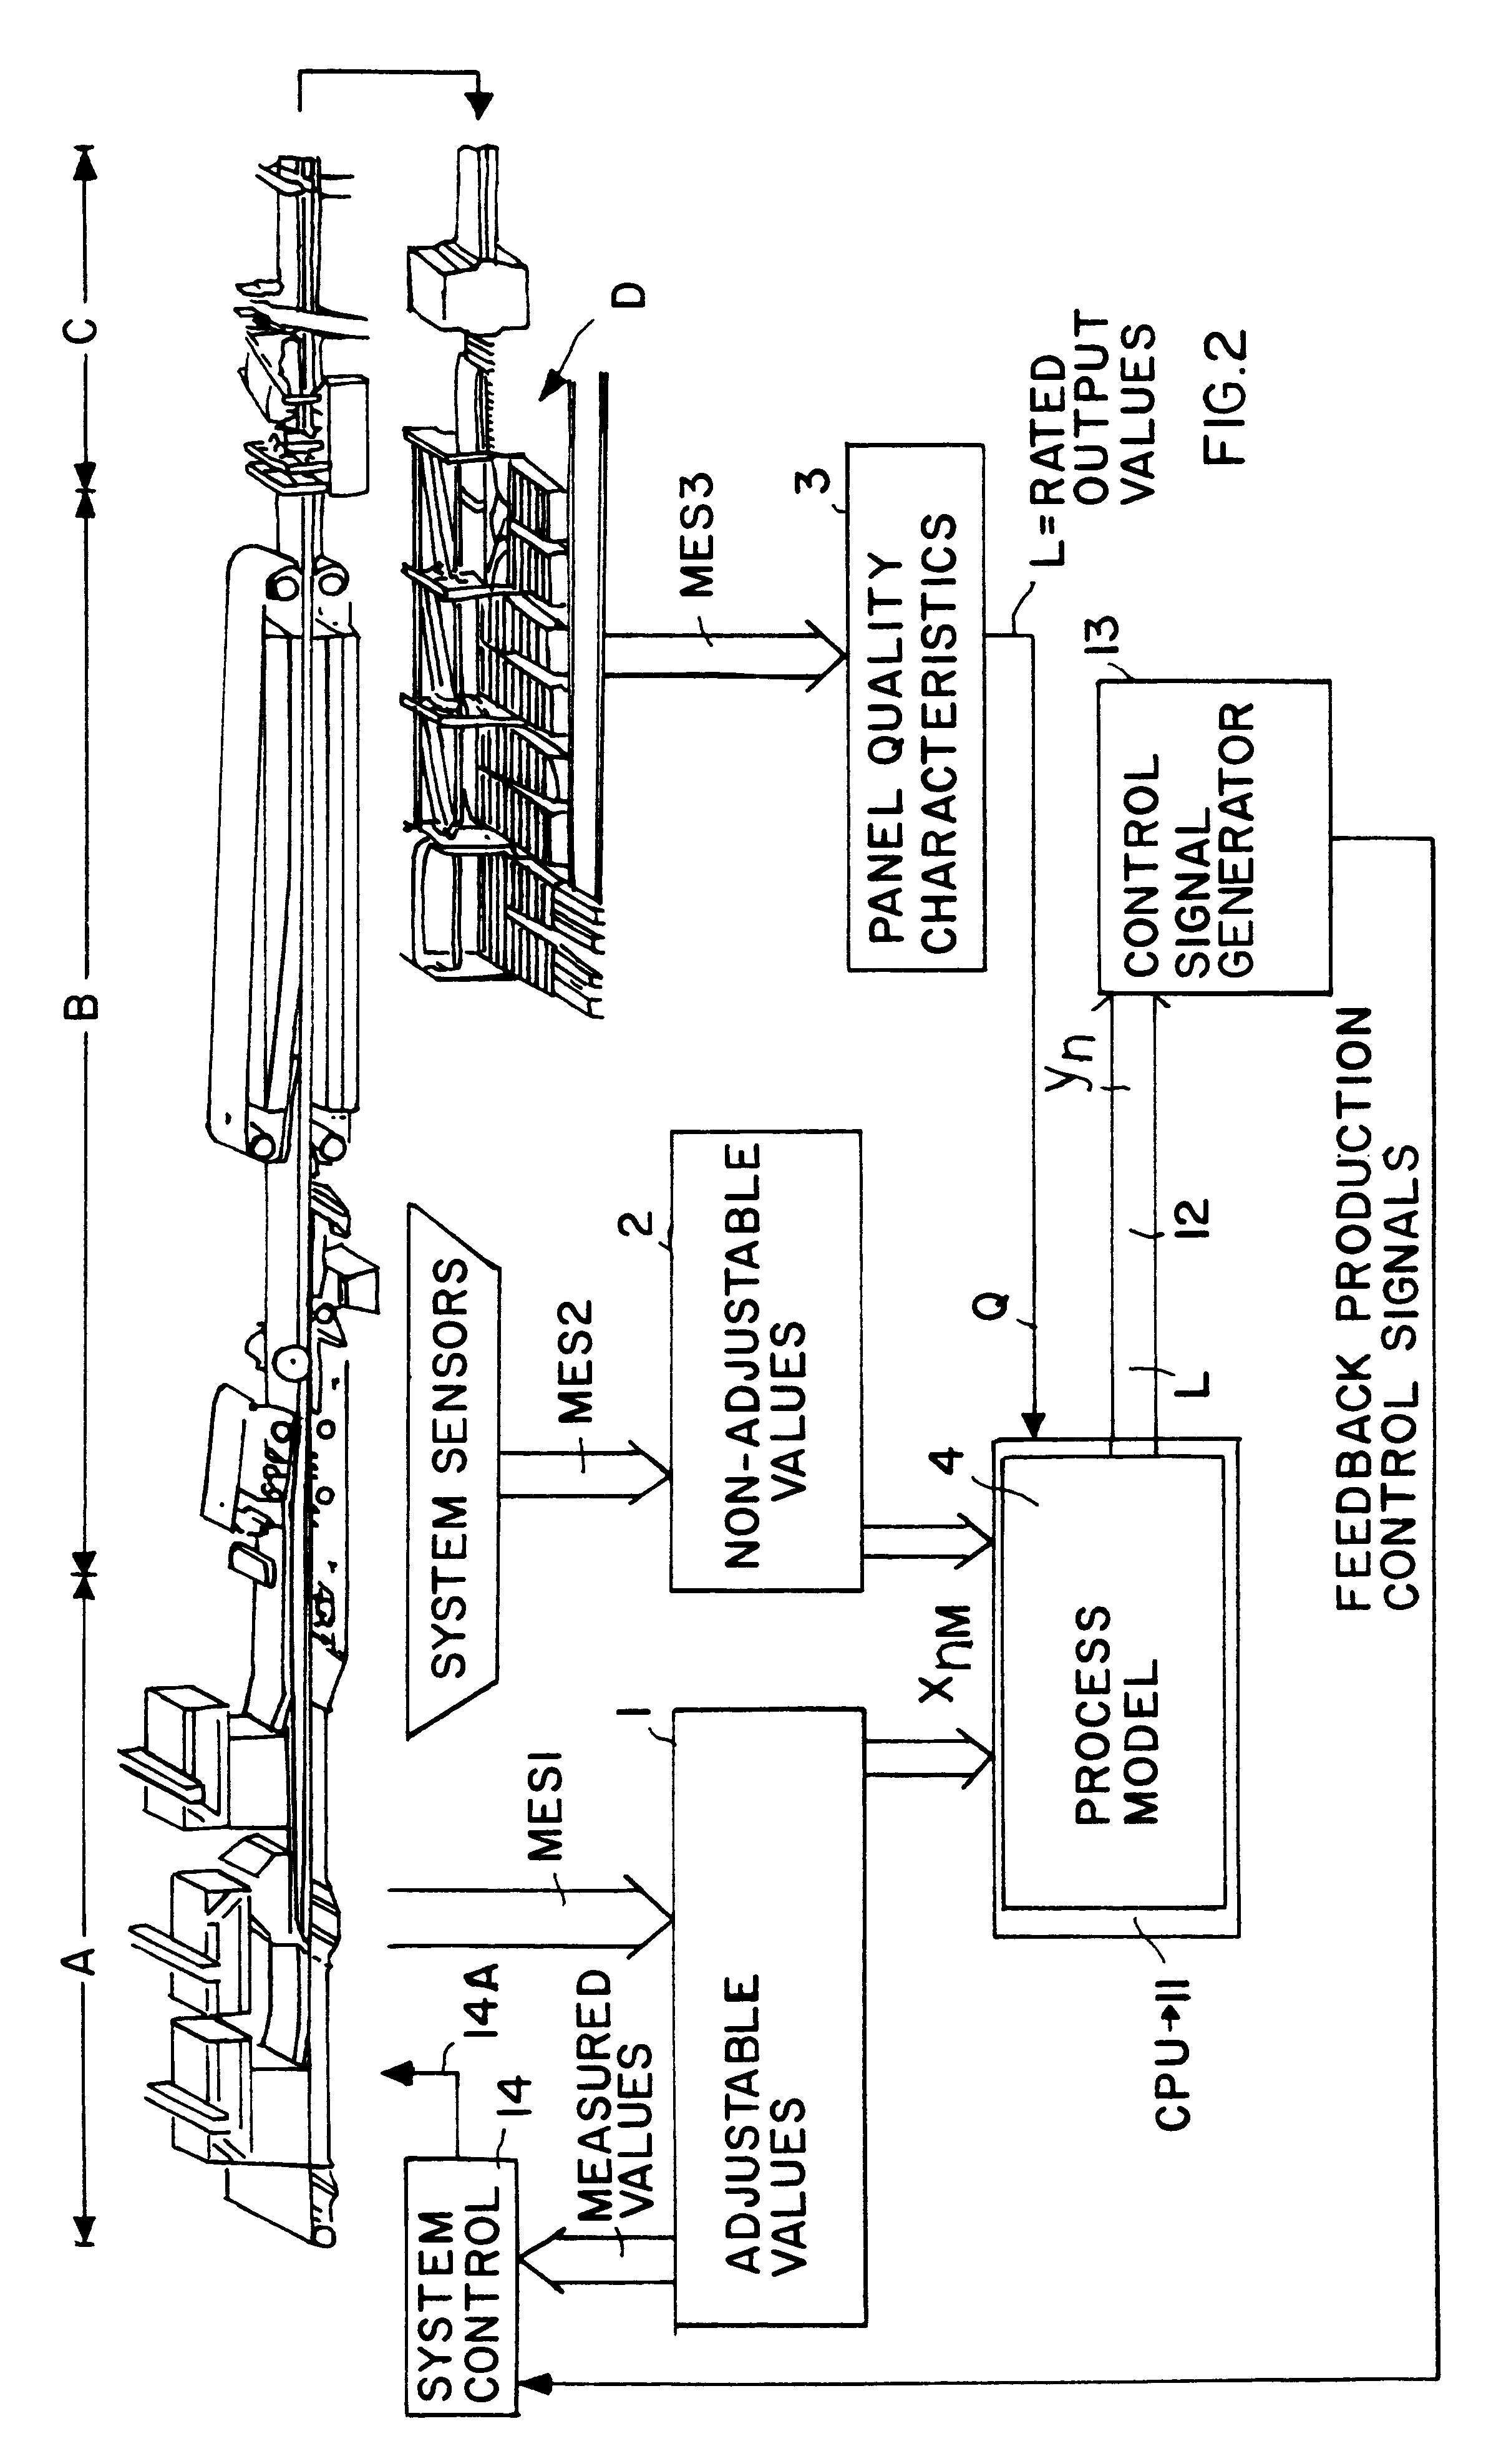 Method and apparatus for generating a model of an industrial production